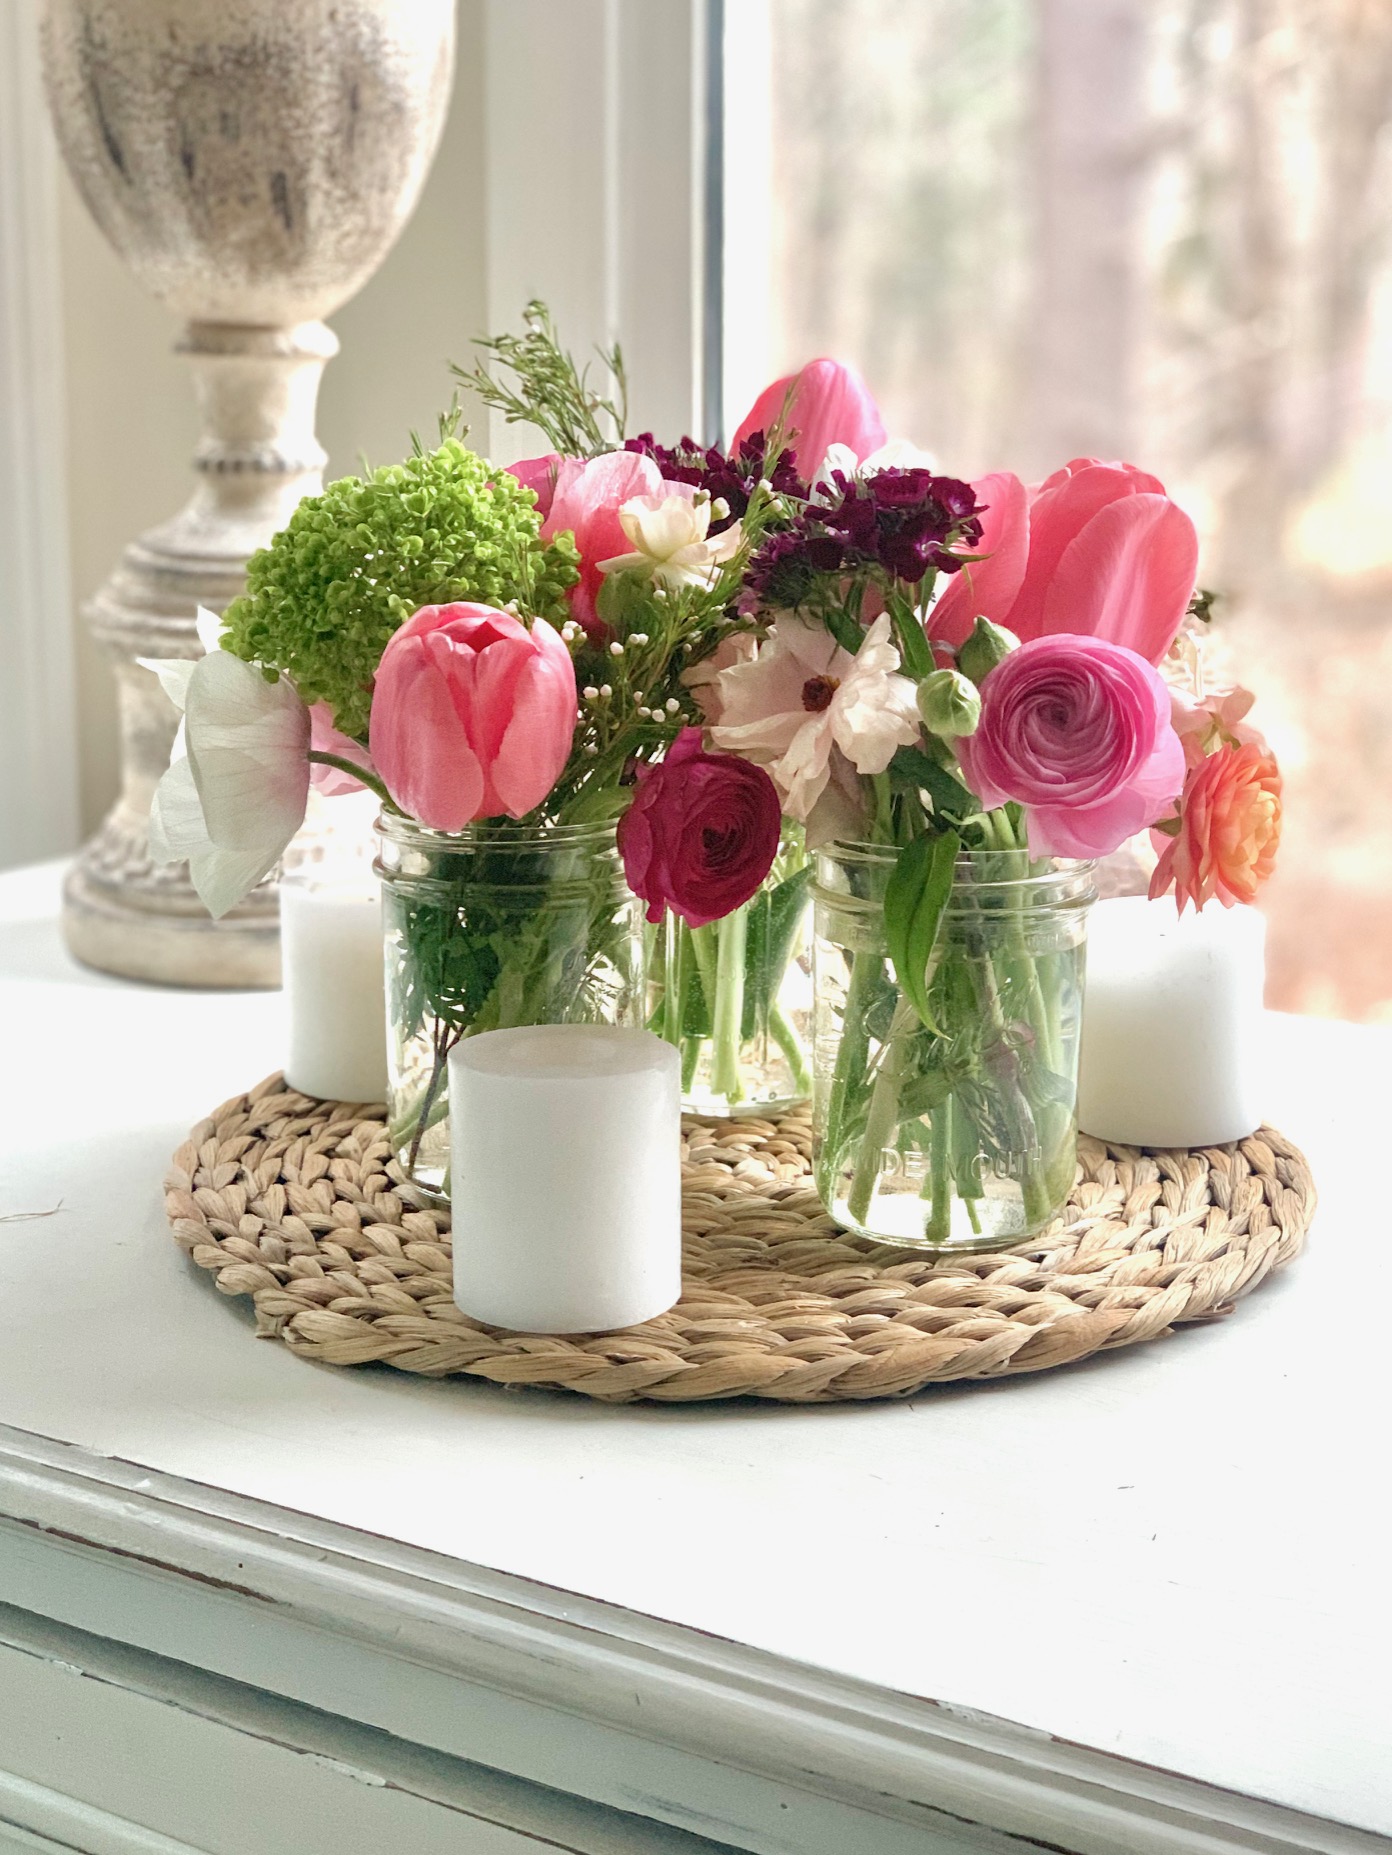 mason jars filed with spring flowers for a clustered Easter centerpiece.